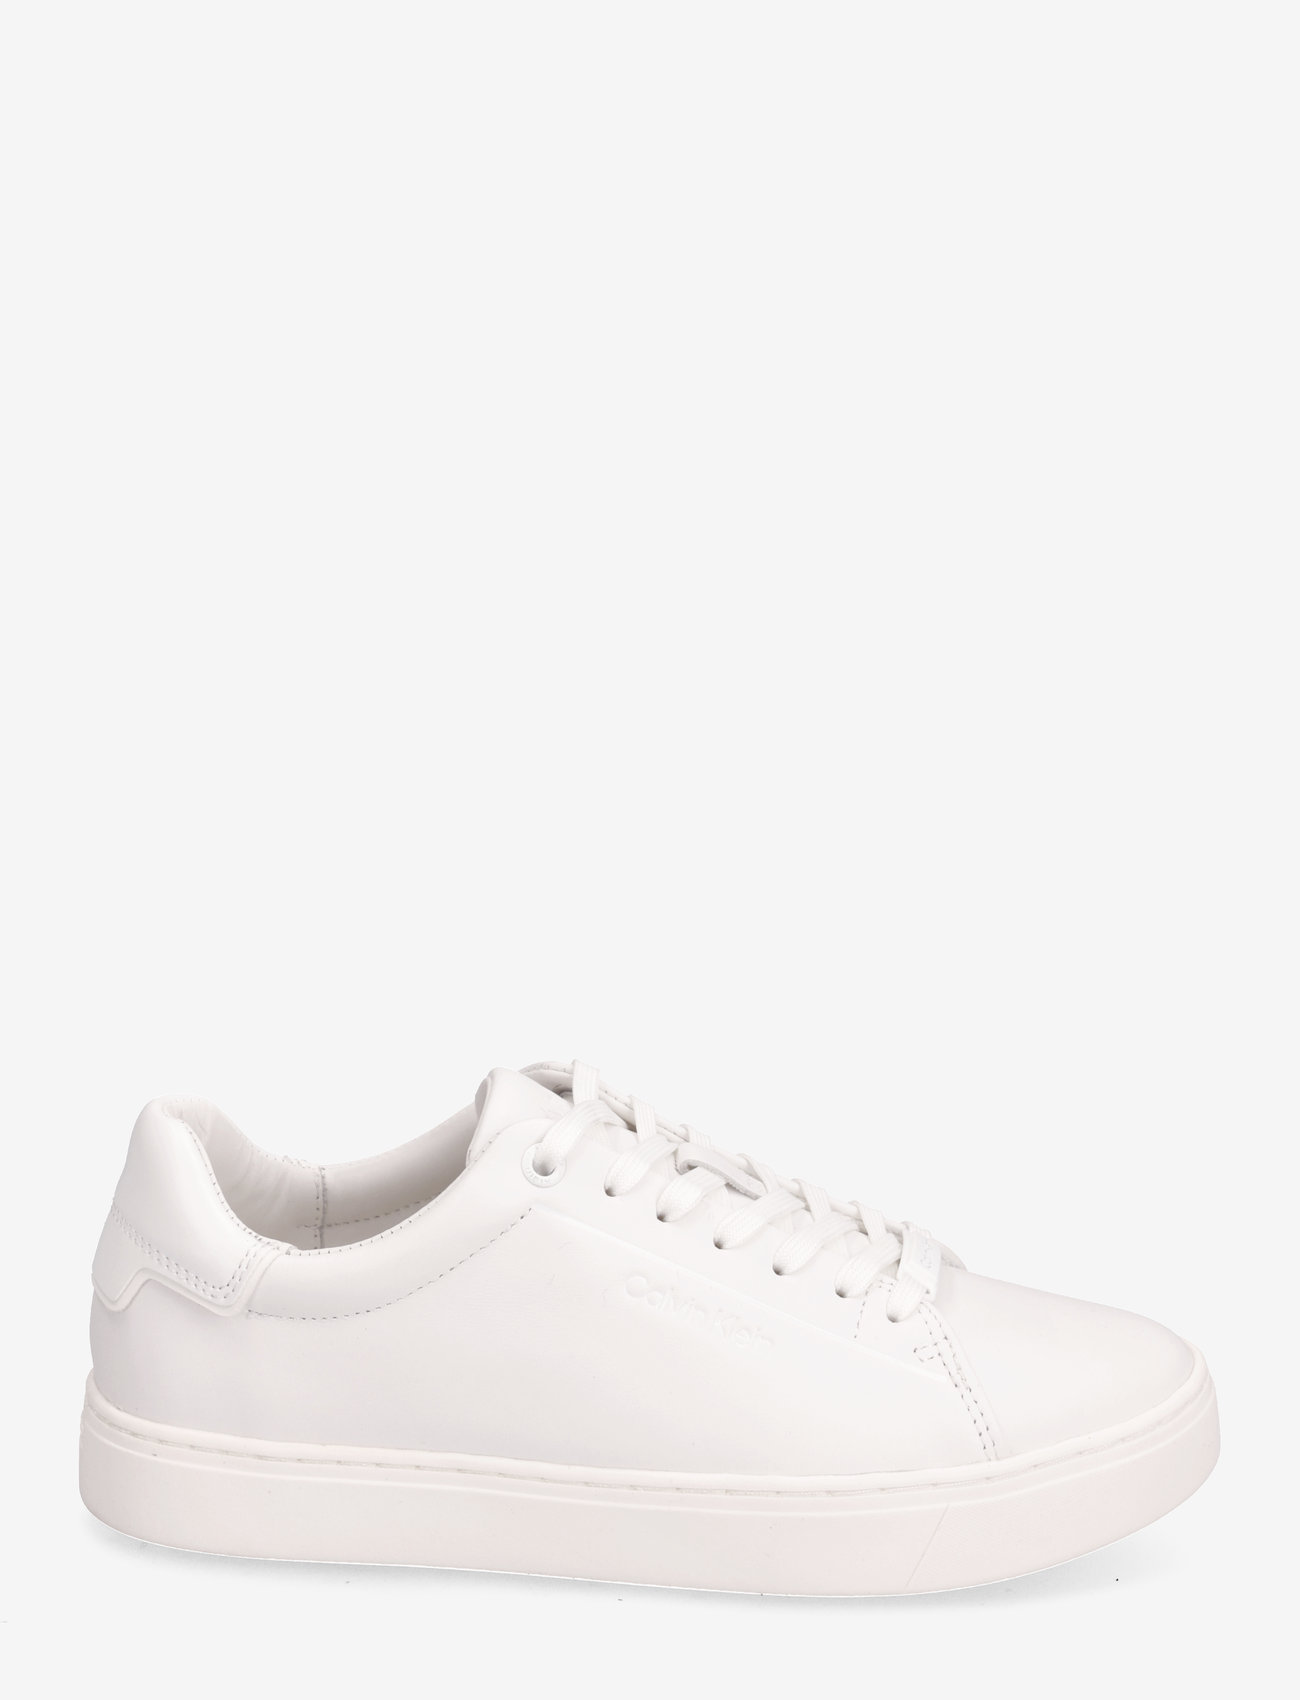 Calvin Klein - CLEAN CUPSOLE LACE UP - sneakersy niskie - triple white - 1